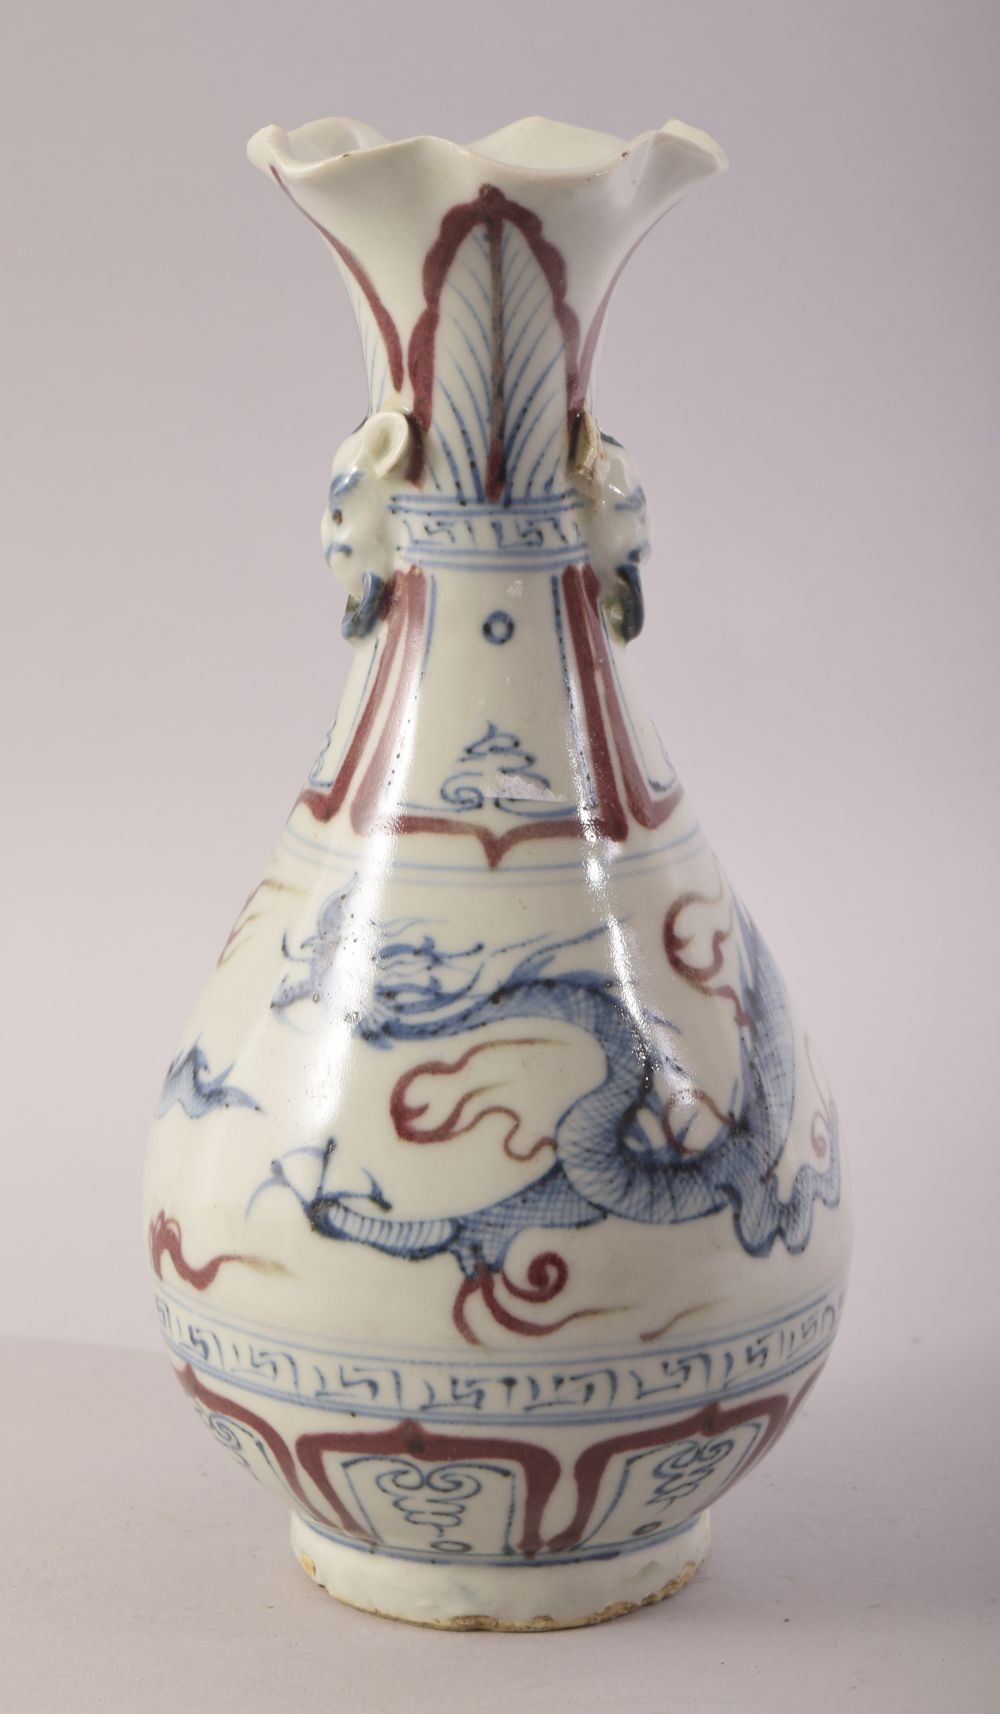 A SMALL CHINESE YUAN STYLE GLAZED POTTERY VASE, painted with a dragon, the neck with two small